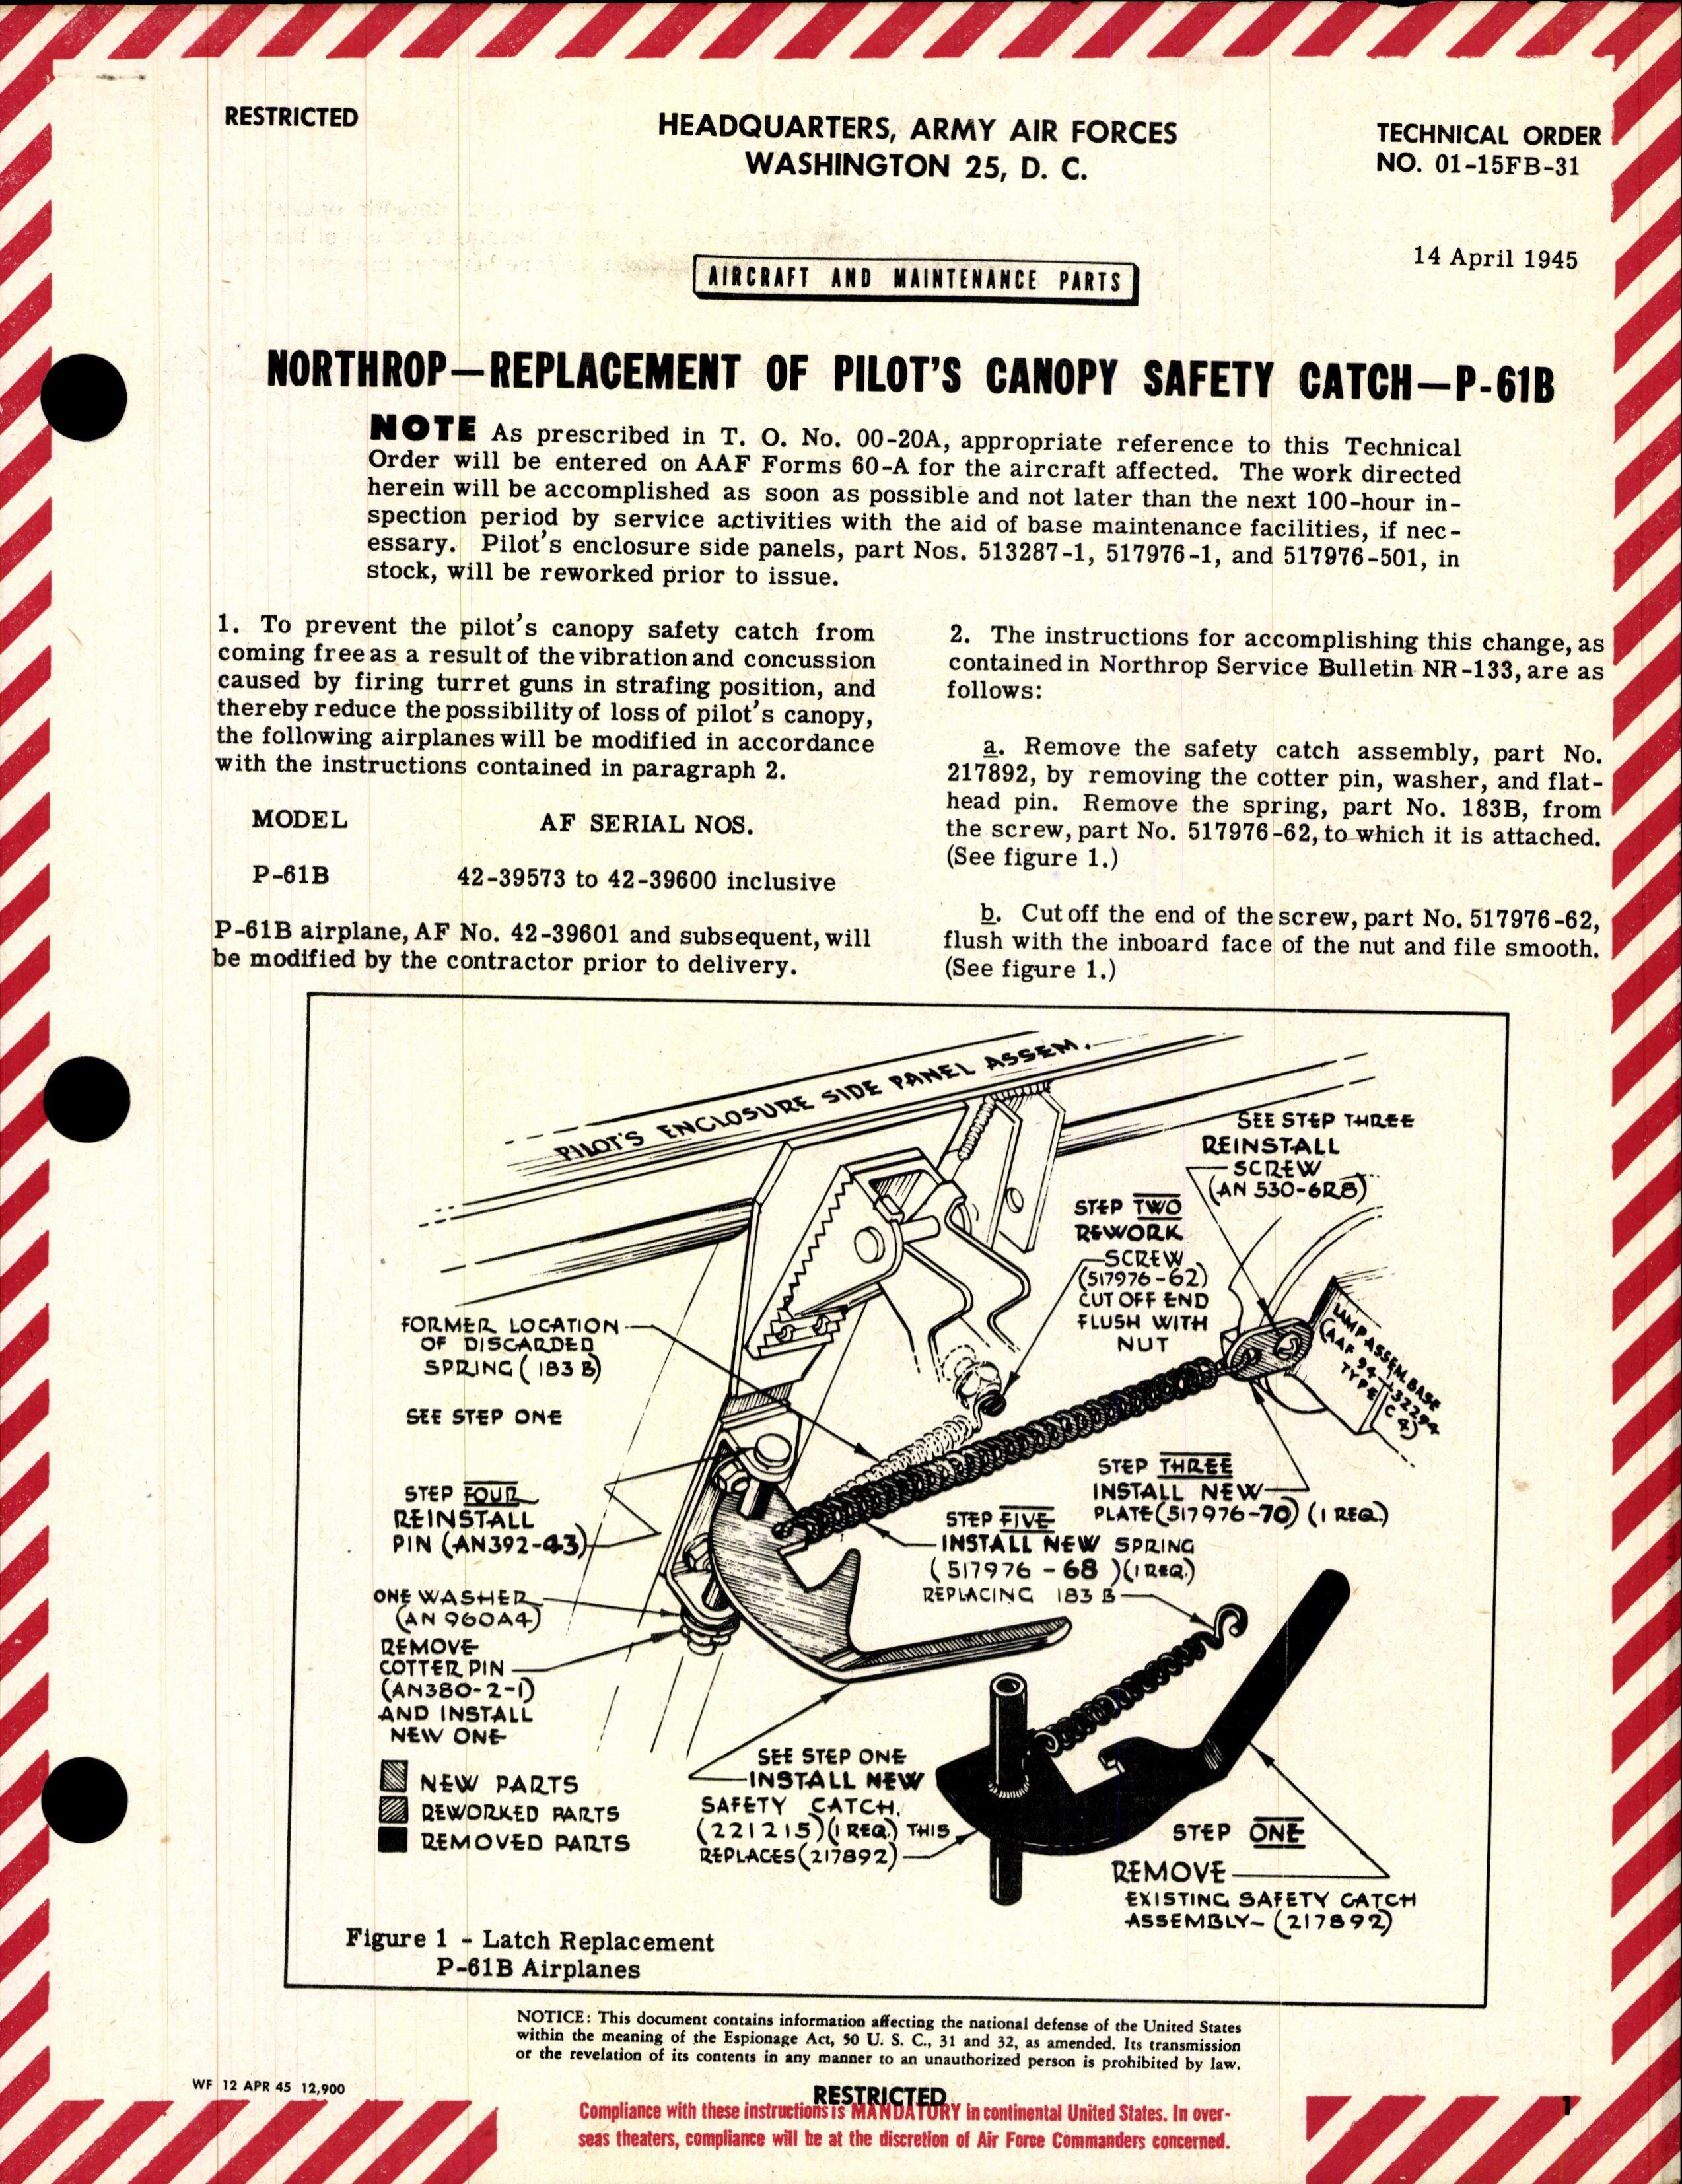 Sample page 1 from AirCorps Library document: Replacement of Pilot's Canopy Safety Catch for P-61B